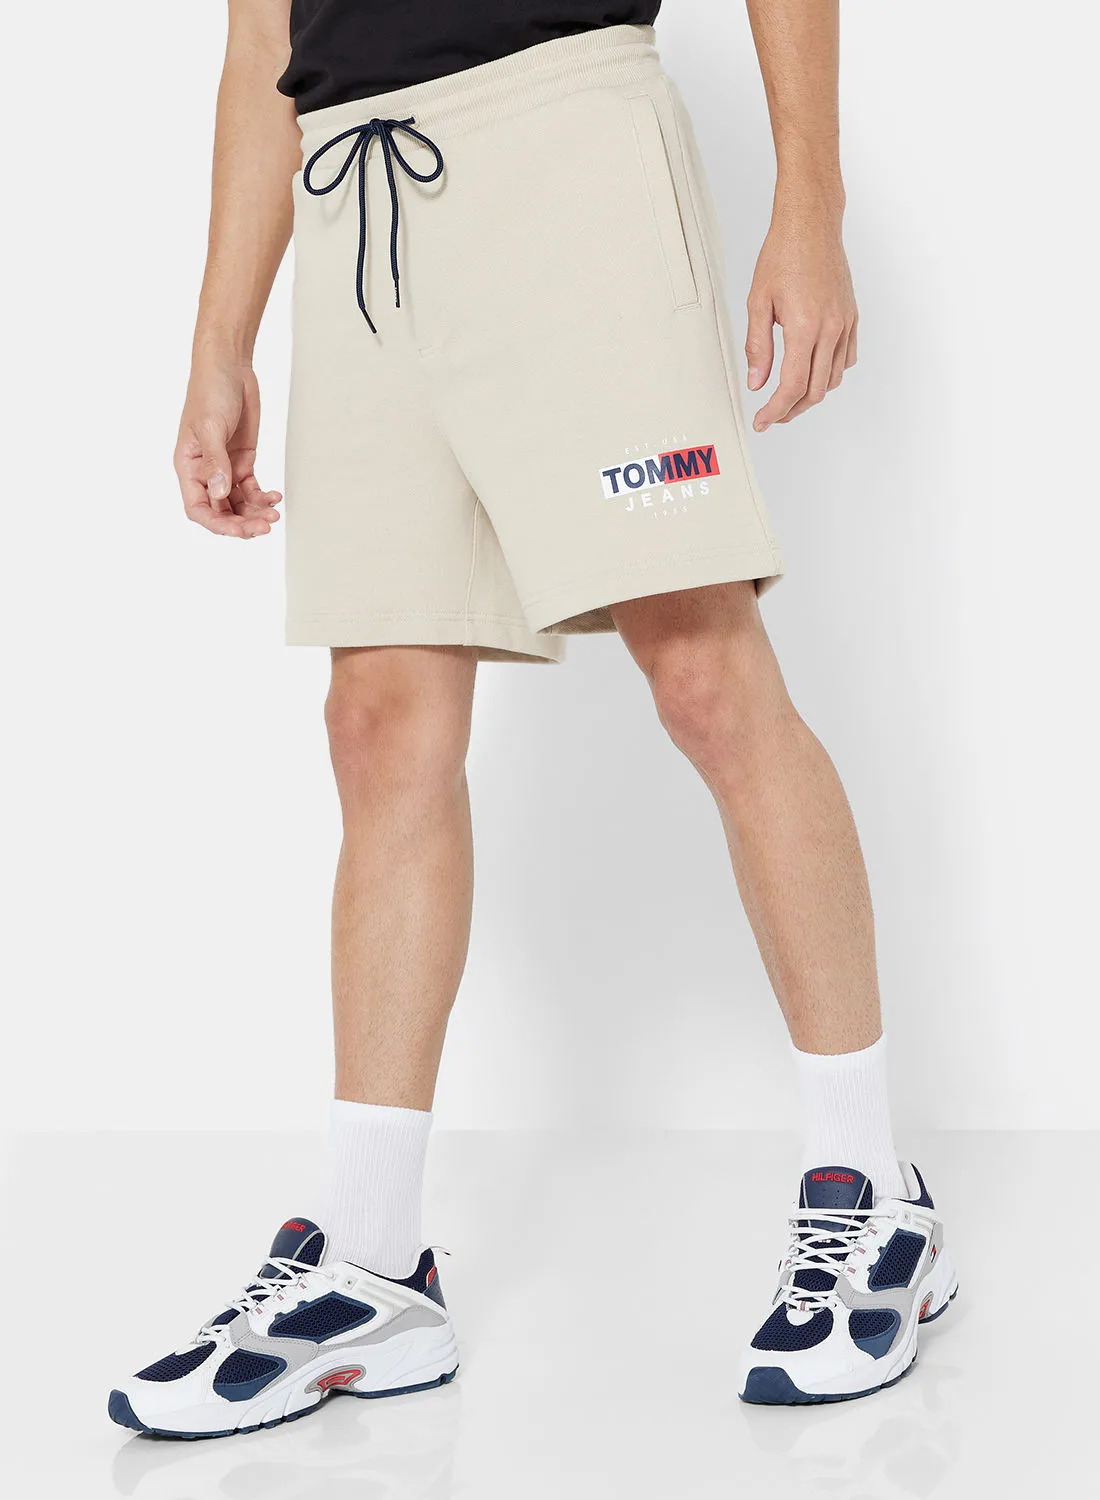 TOMMY JEANS Logo Entry Flag Shorts